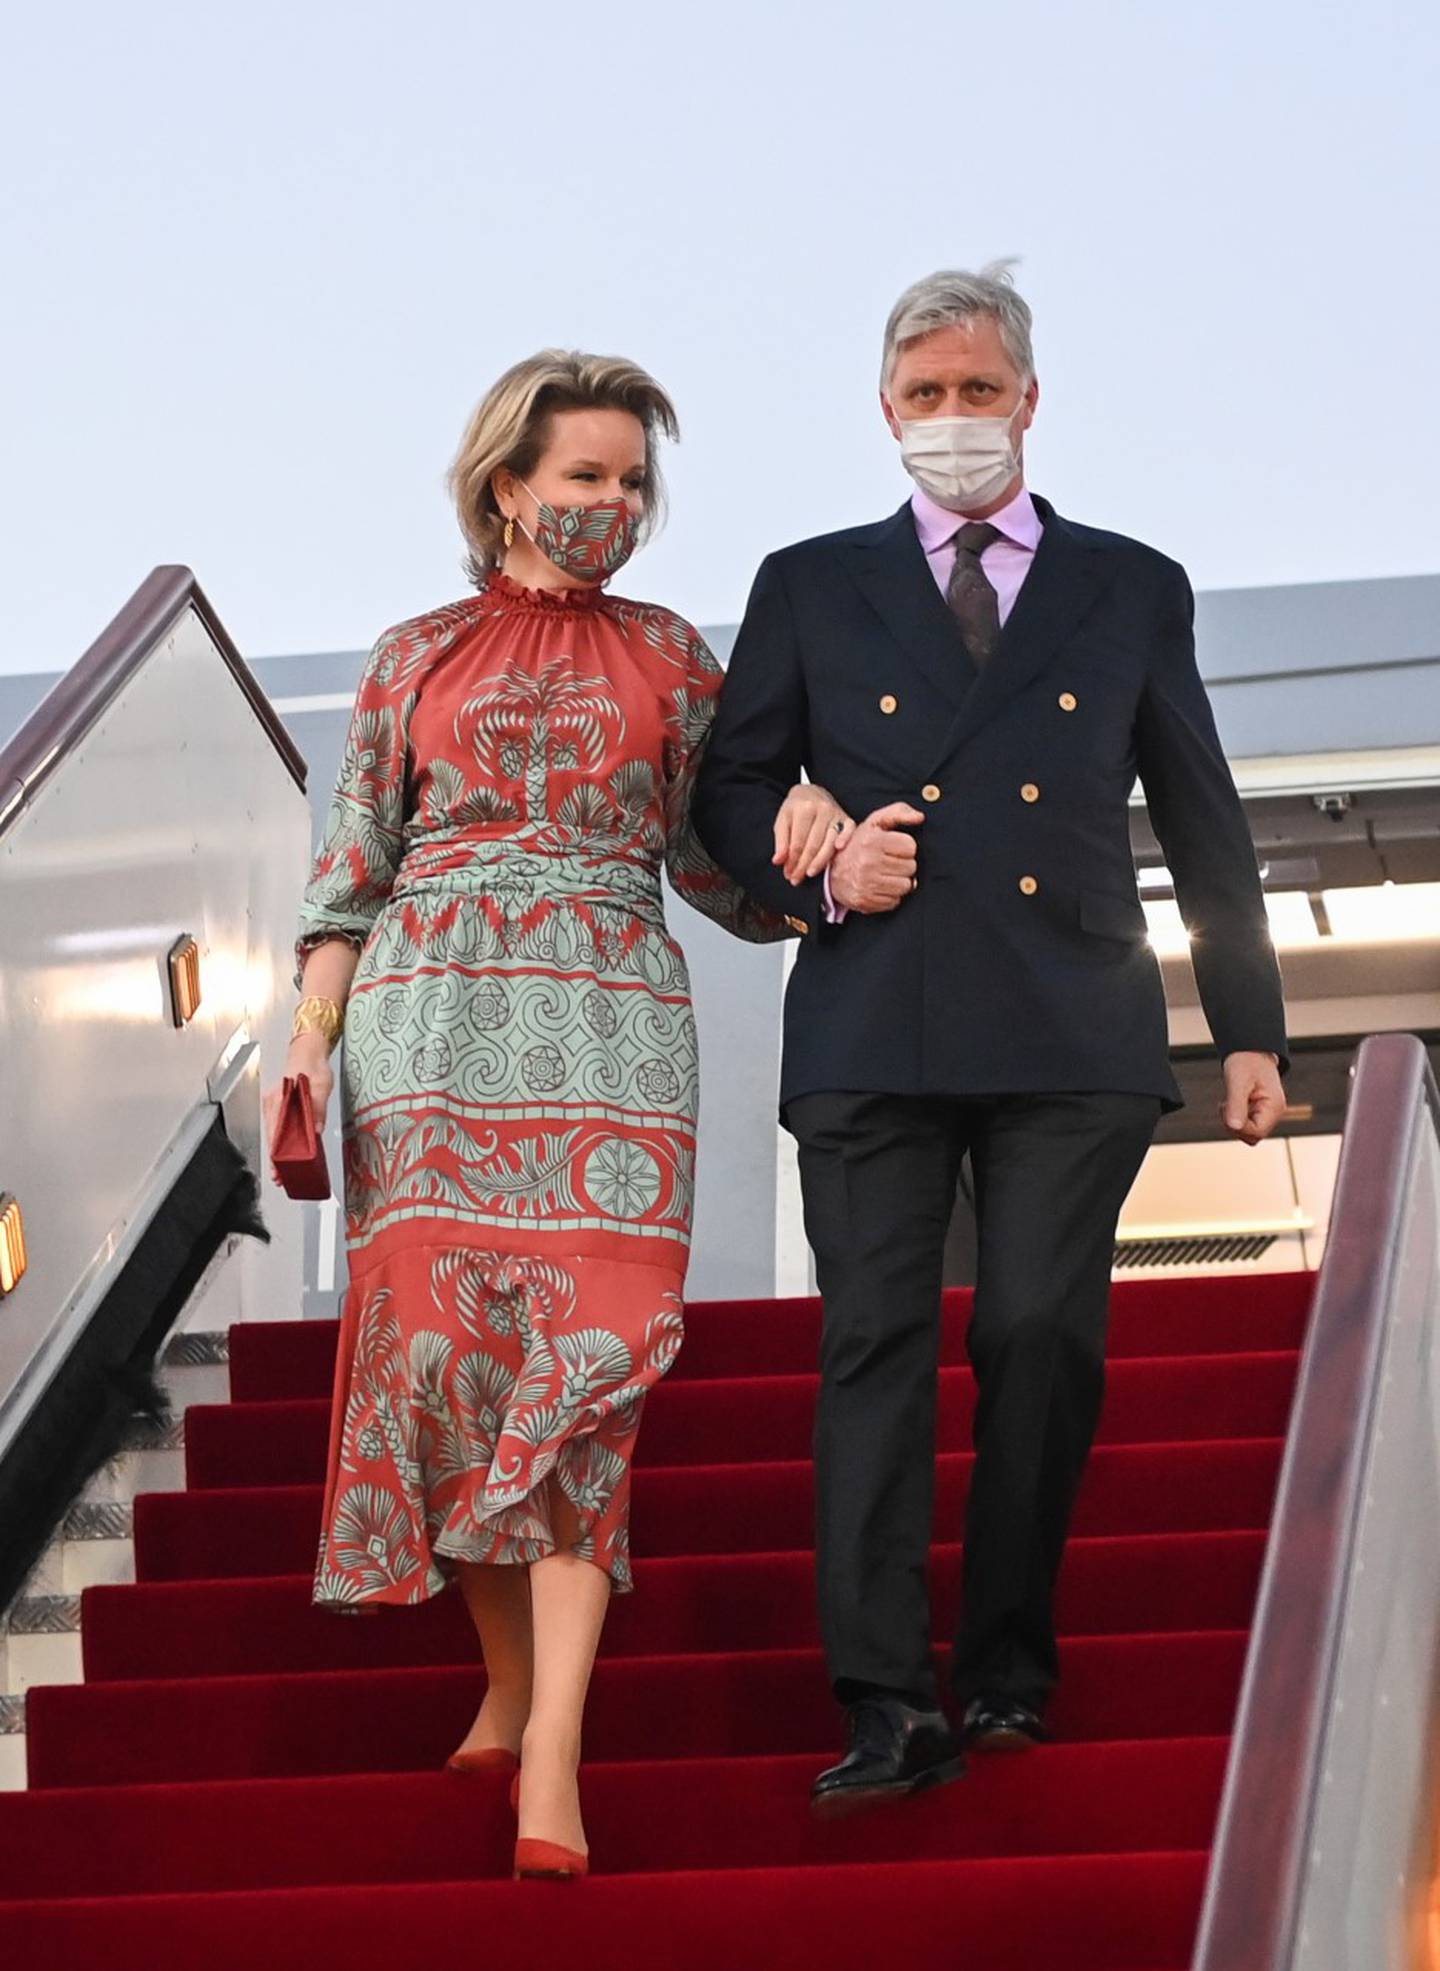 King Philippe and Queen Mathilde of Belgium are in Oman to strengthen relations between the two countries. Photo: Oman News Agency